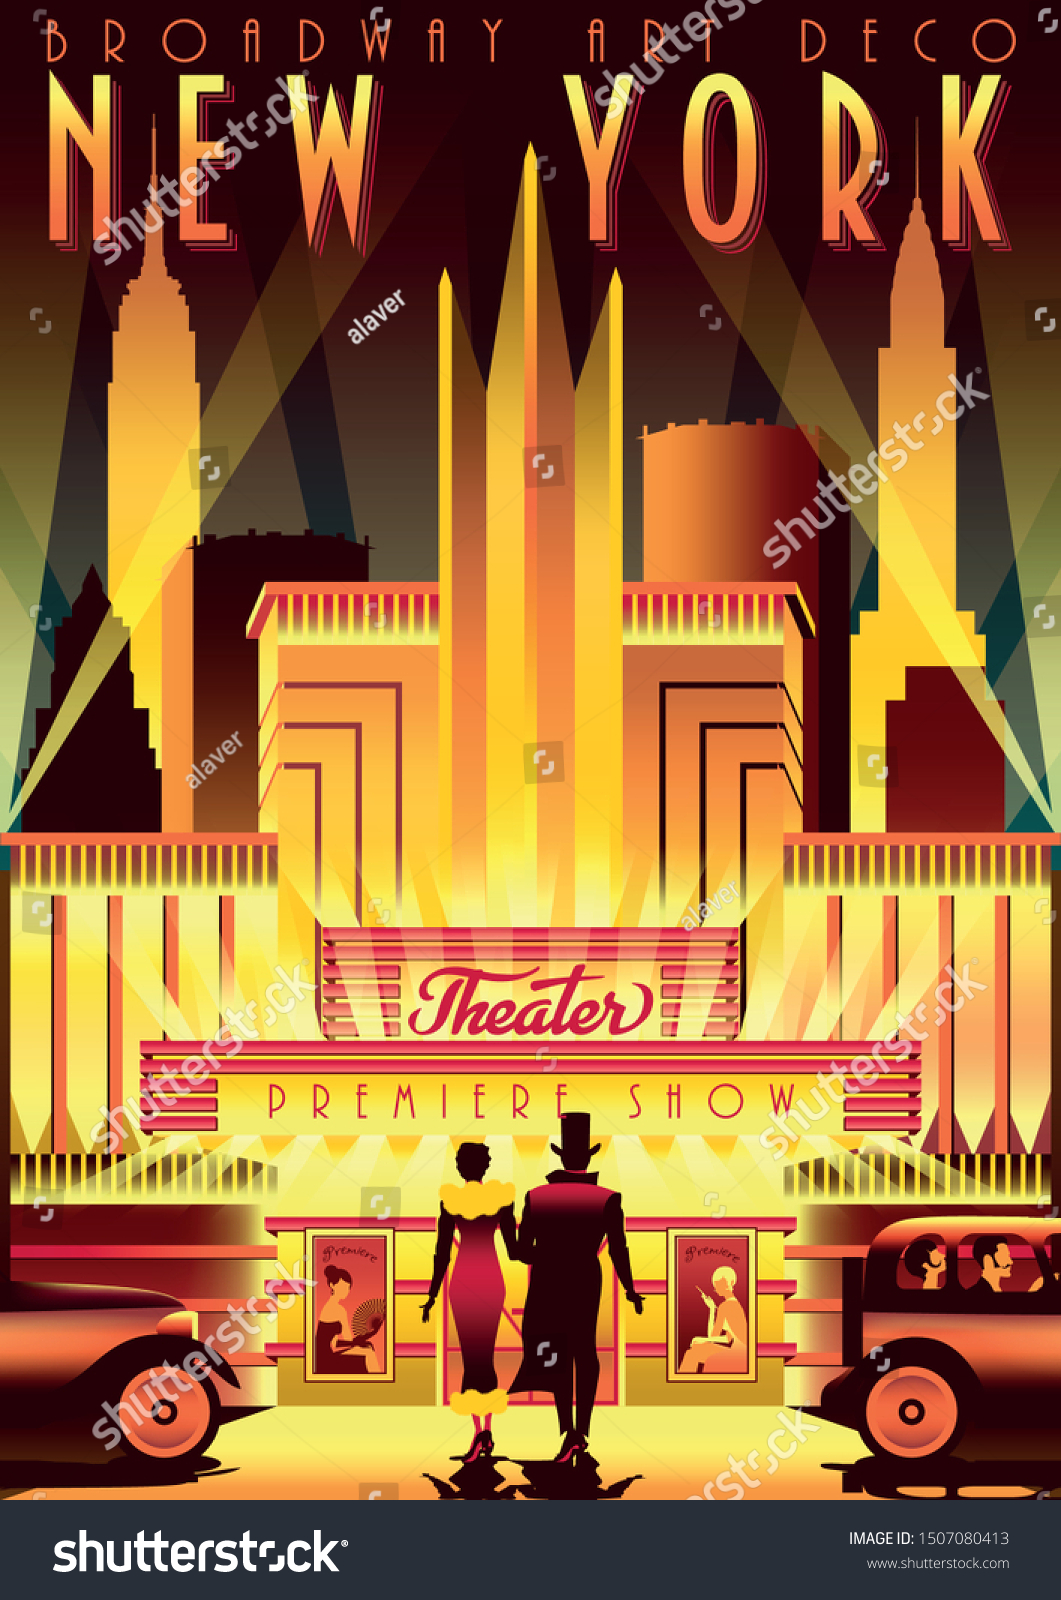 SVG of New York Night Broadway in the style of the 30s of the 20th century. Handmade drawing vector illustration. Art deco retro poster style. svg